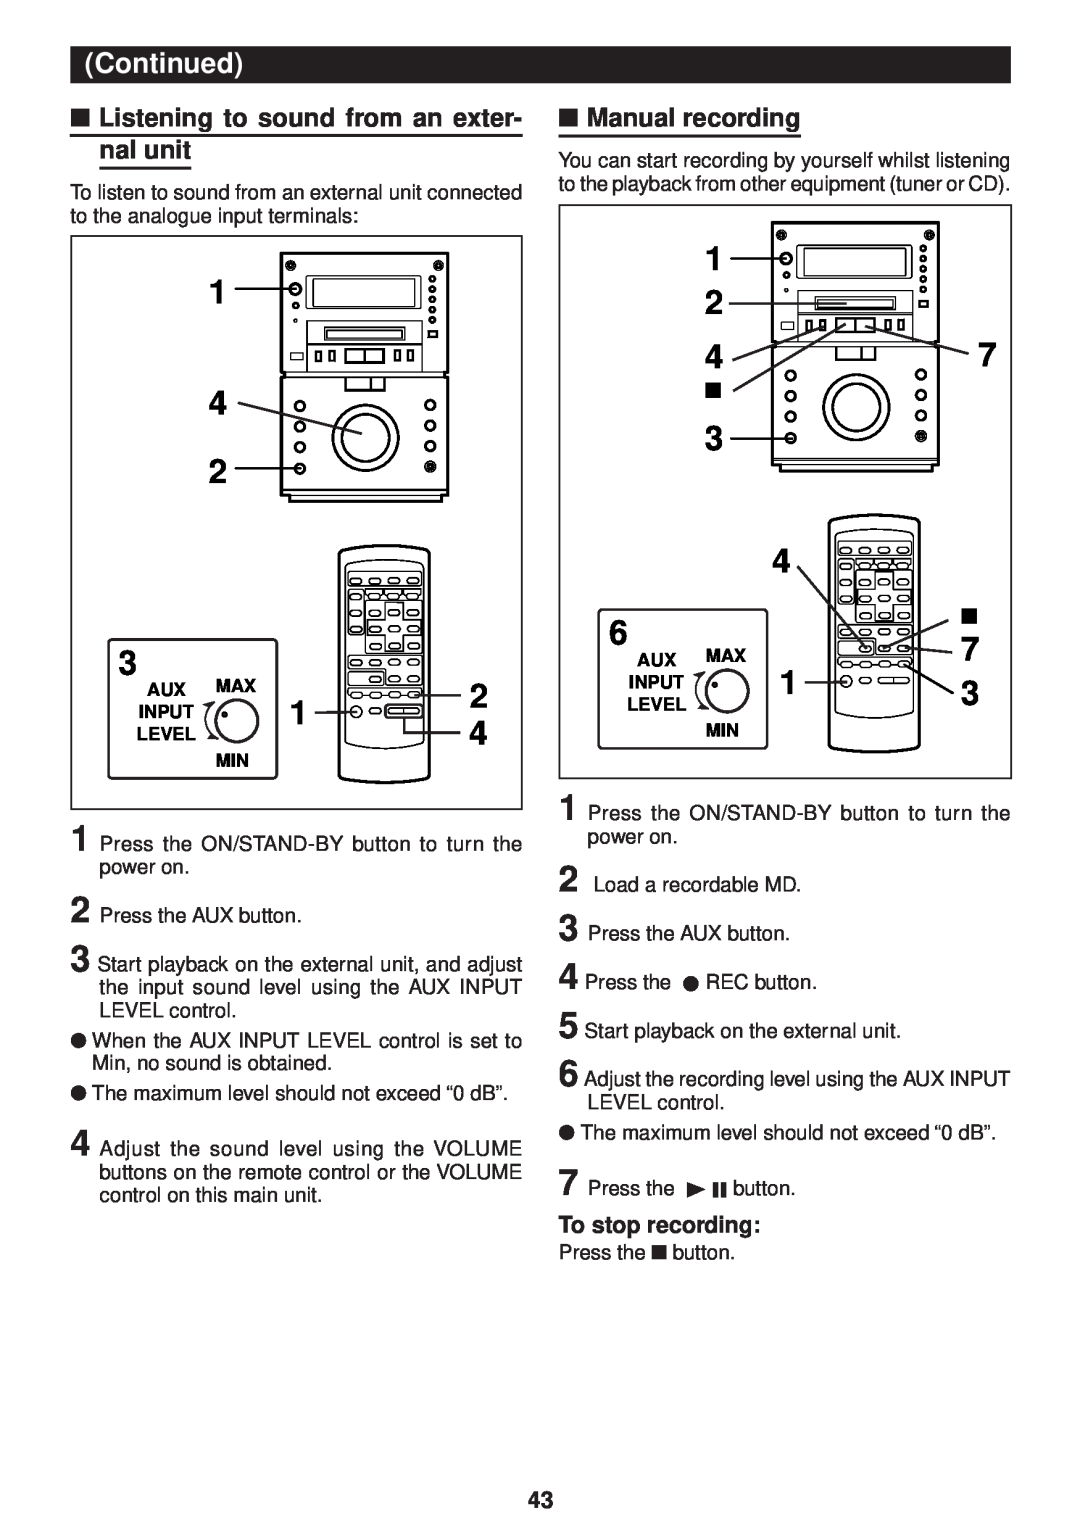 Sharp MD-M3H operation manual Listening to sound from an exter-nal unit, Manual recording, To stop recording 